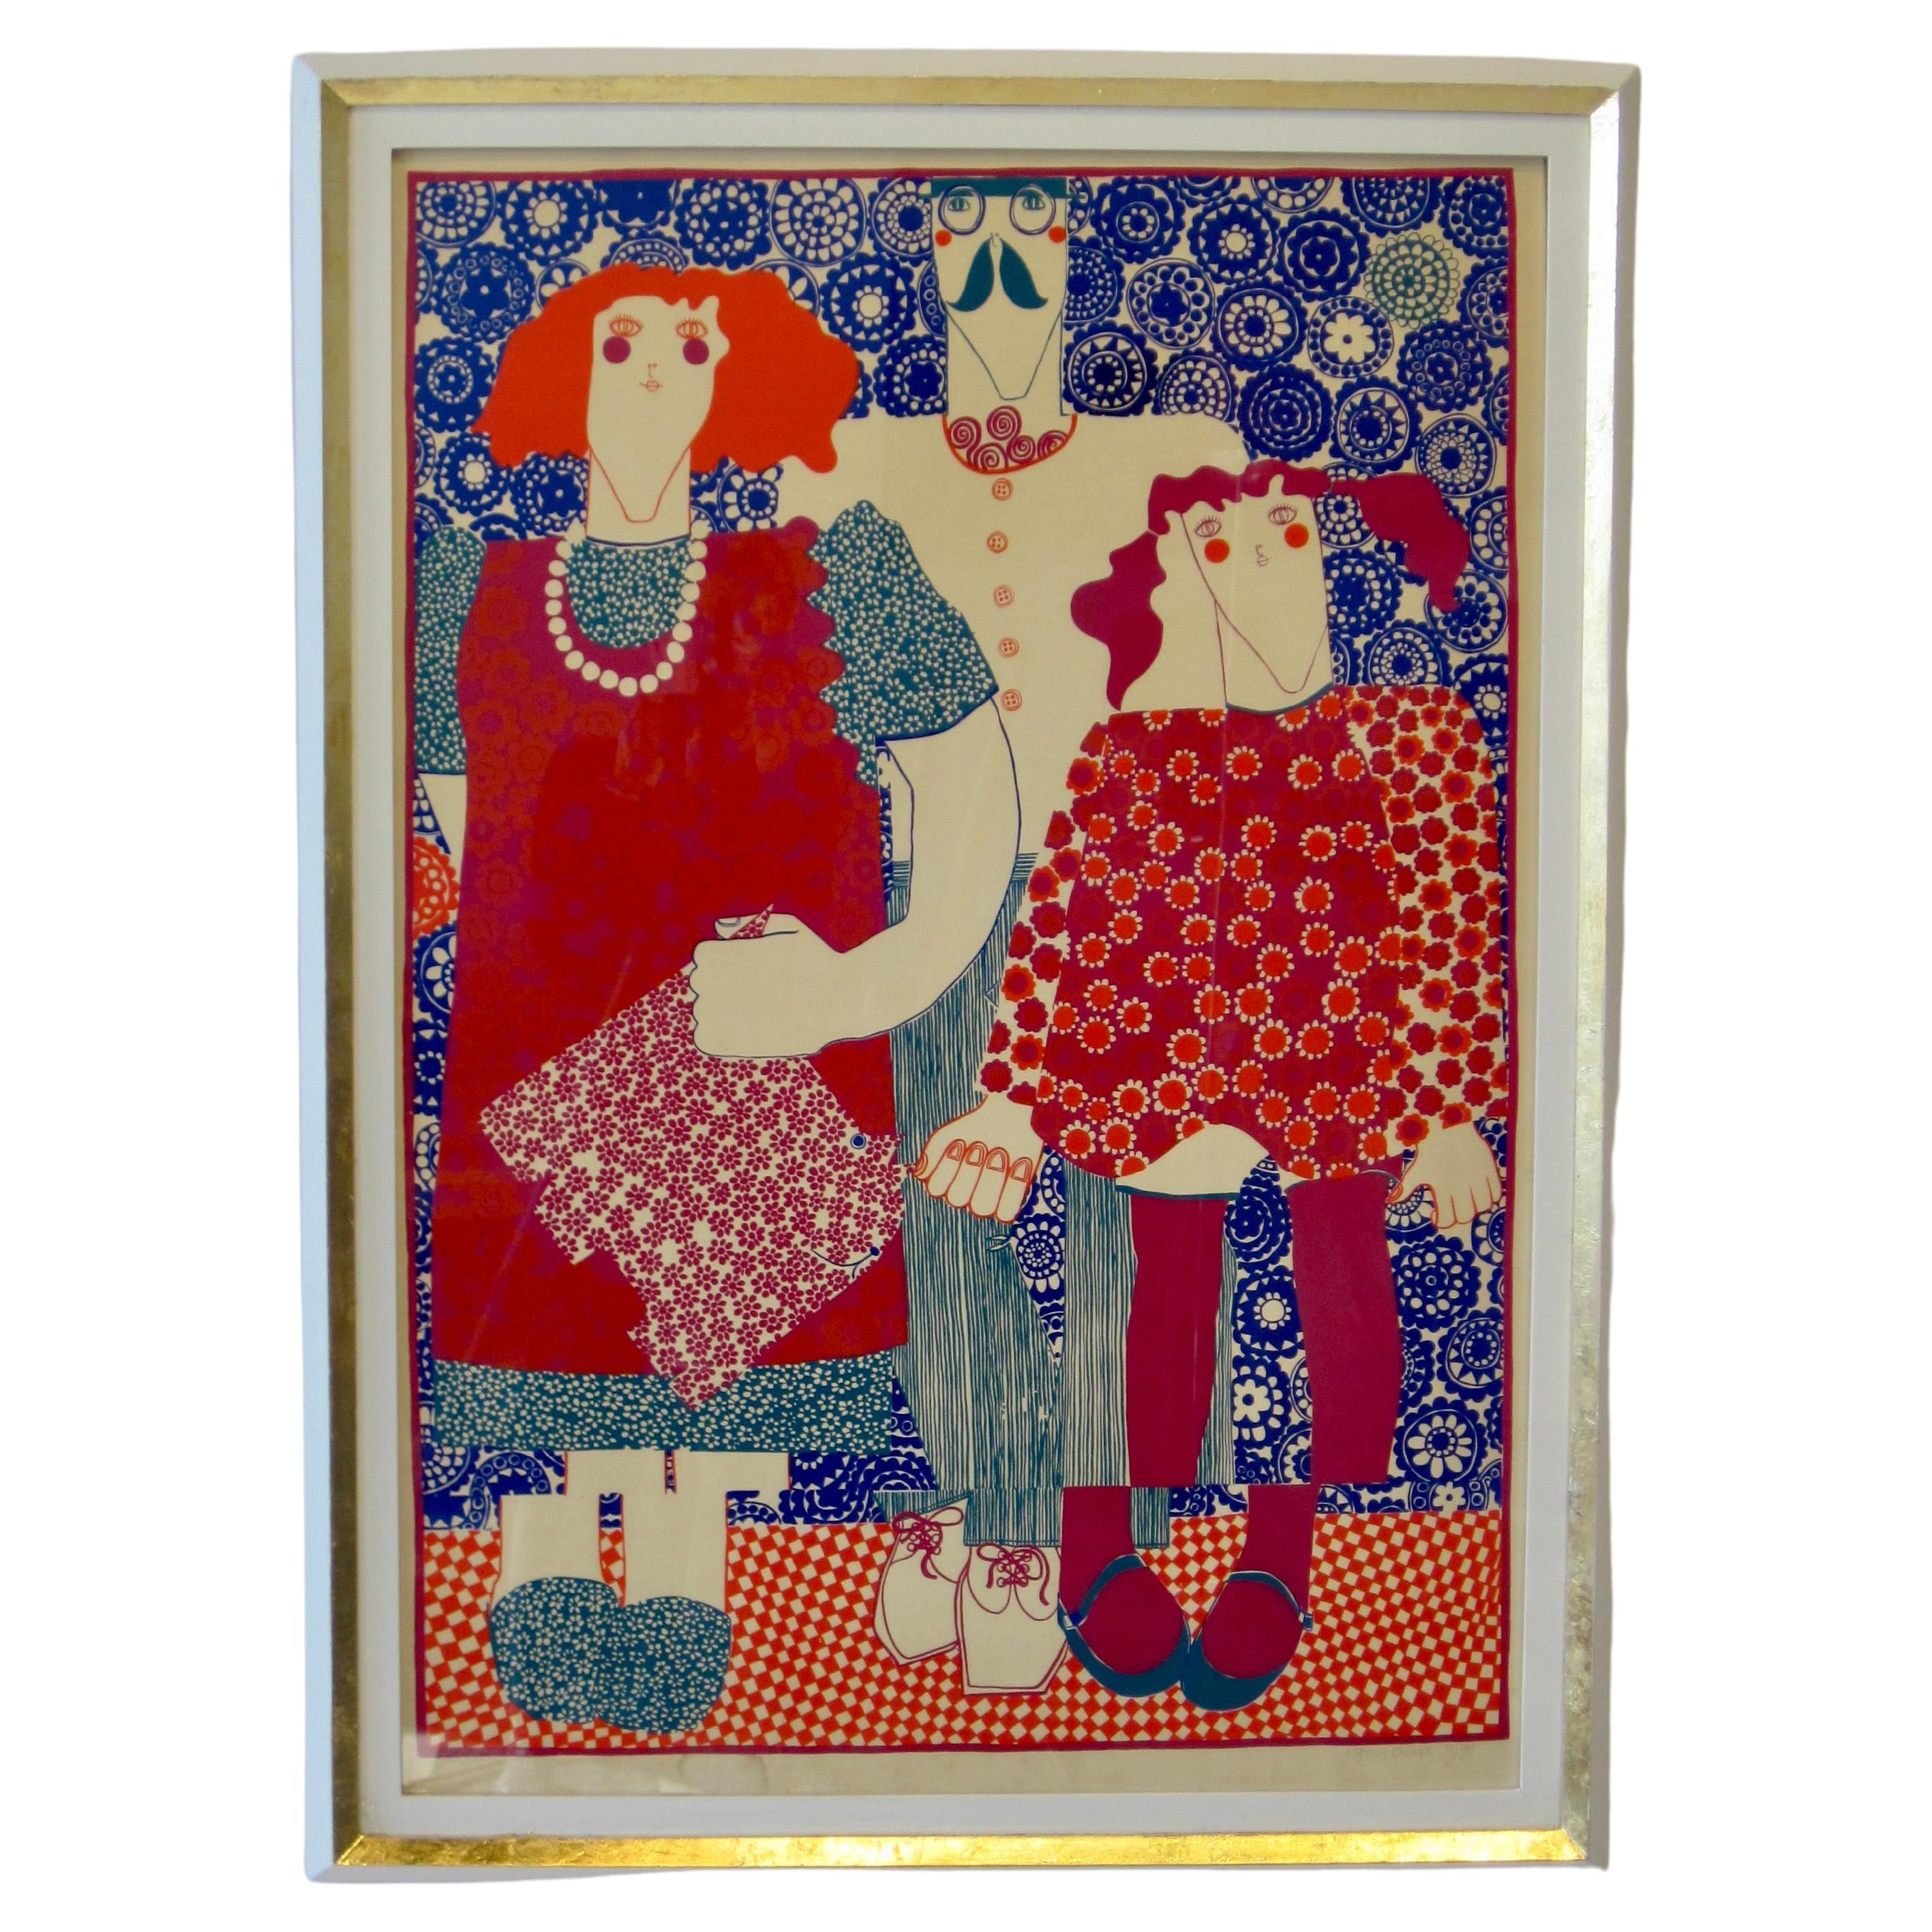 Mod Era Vividly Colored Silkscreen on Paper by Myfanwy Phillips For Sale